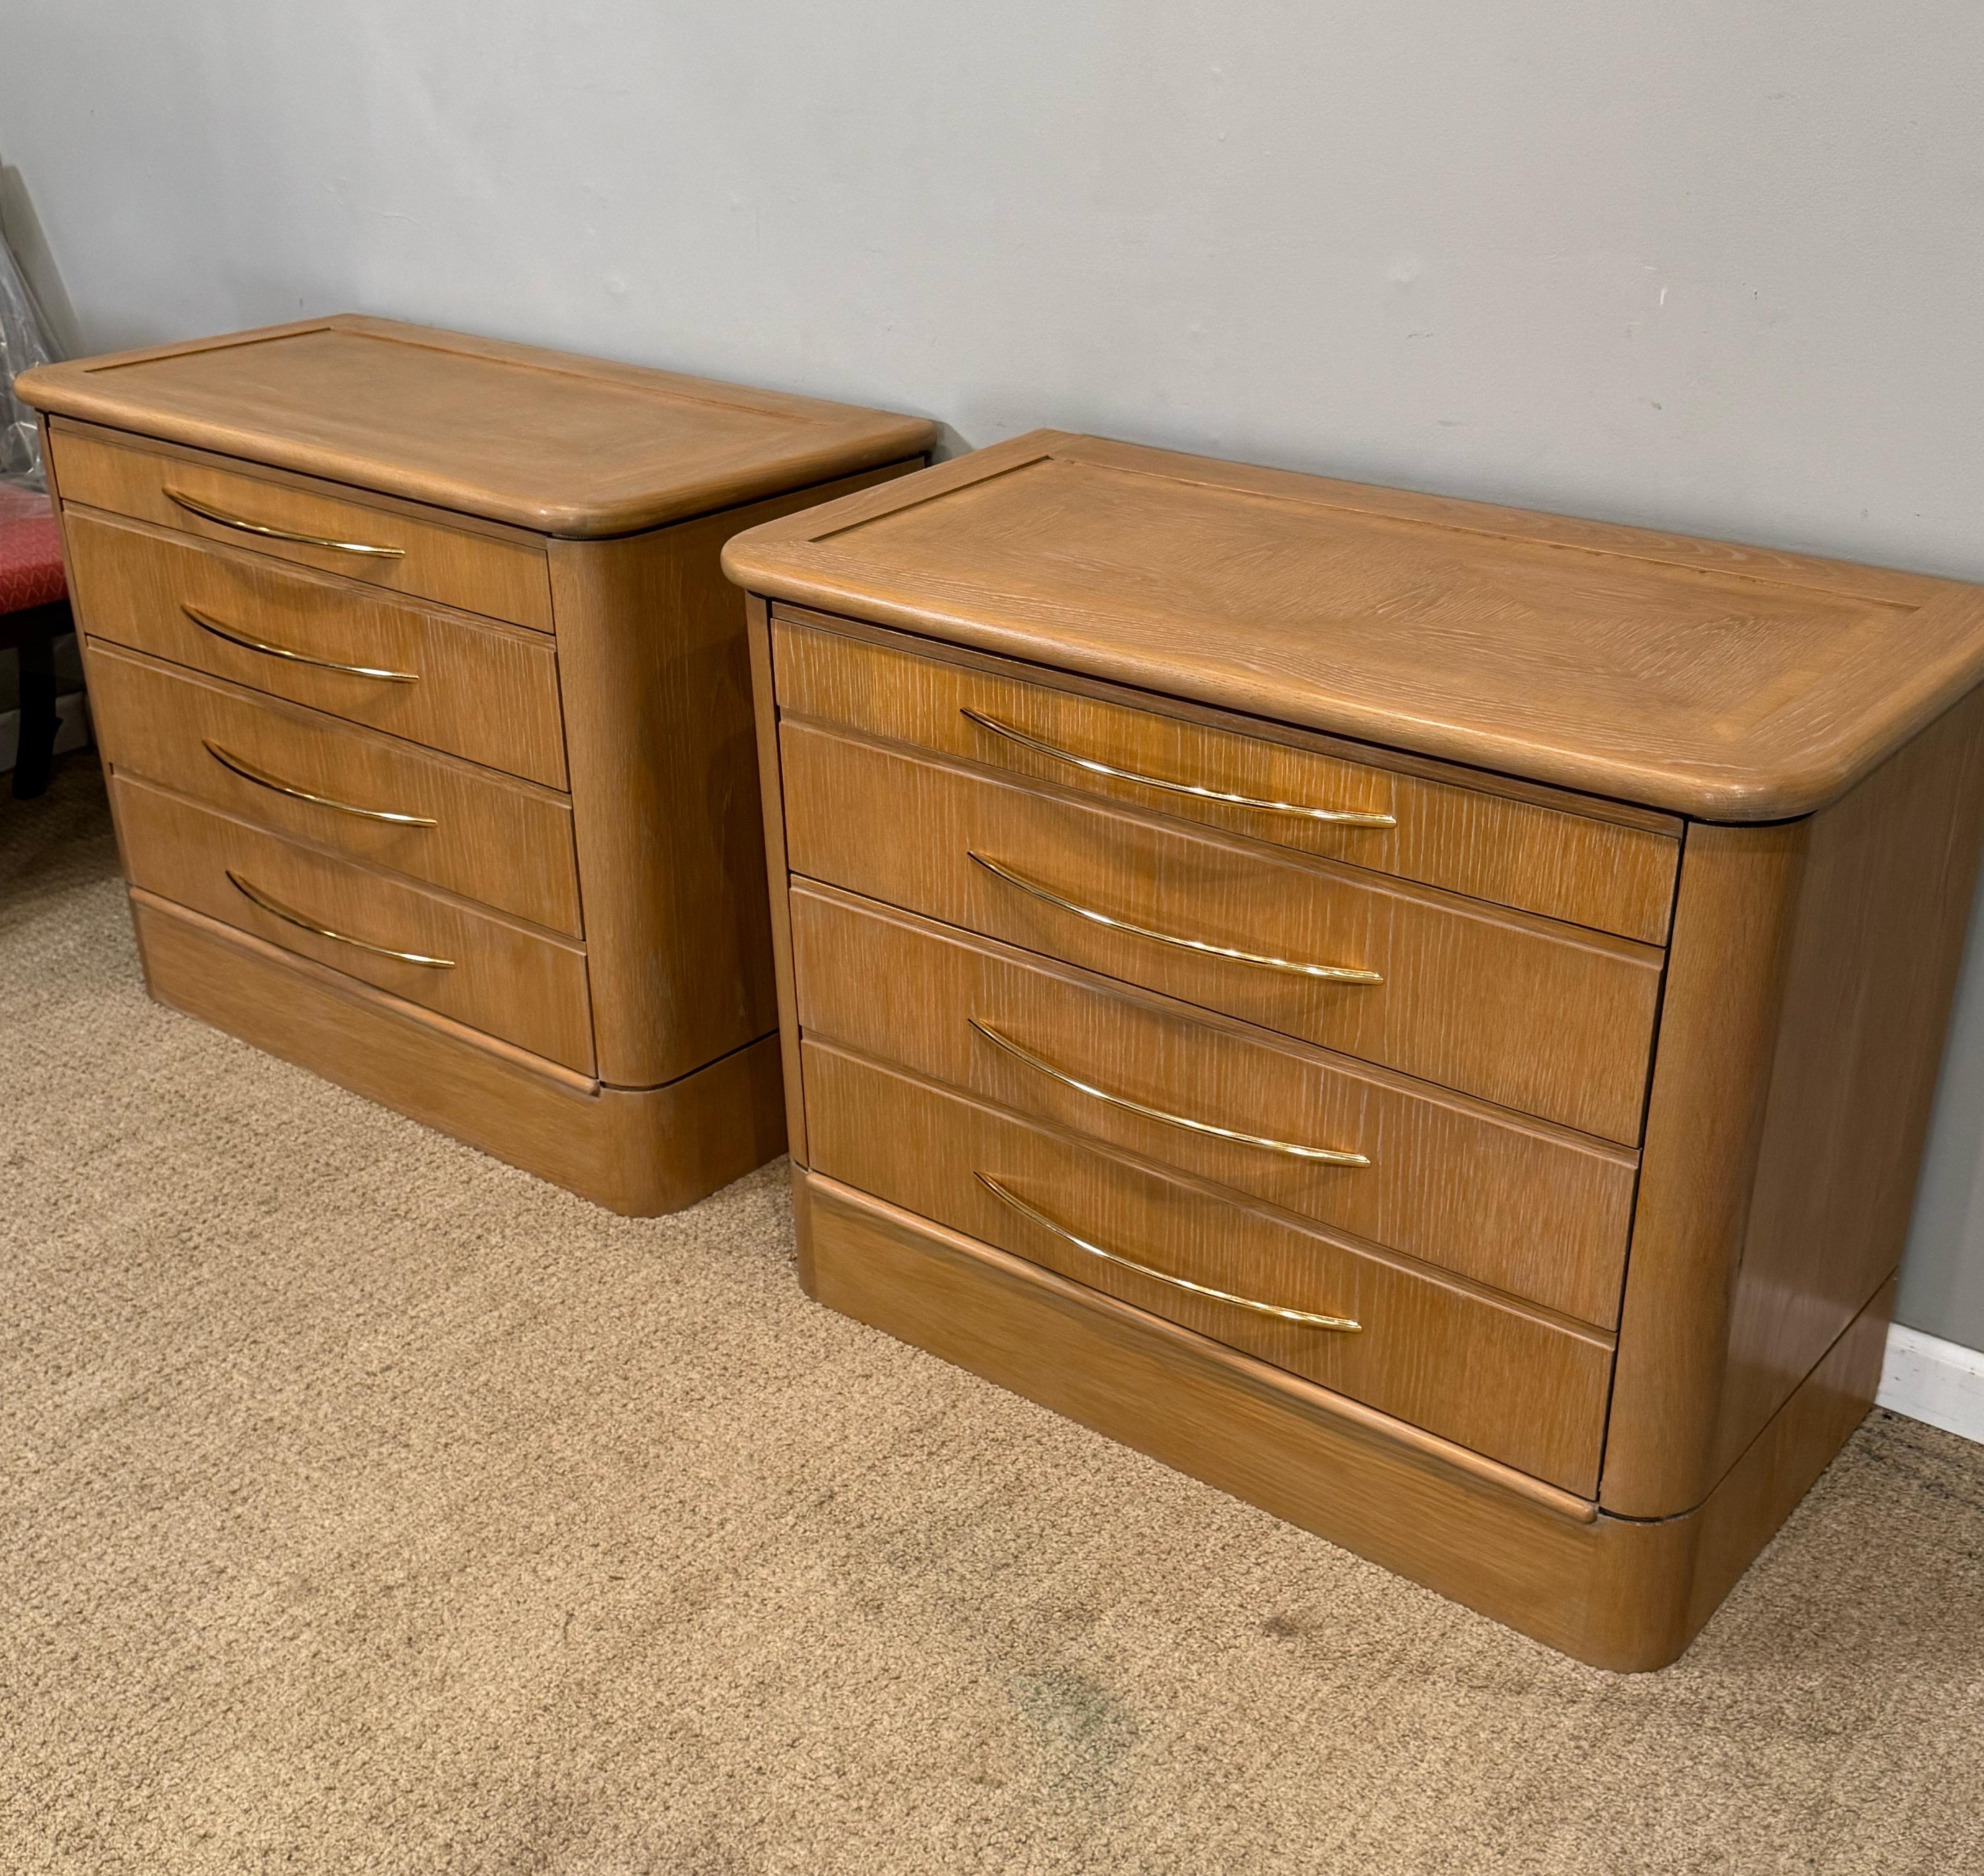 A Pair of Bedside Chests In a lightly Cerused 
Light oak finish. With Graduated sized drawers
And soft close drawer runners. Brass handles
Recently finished 